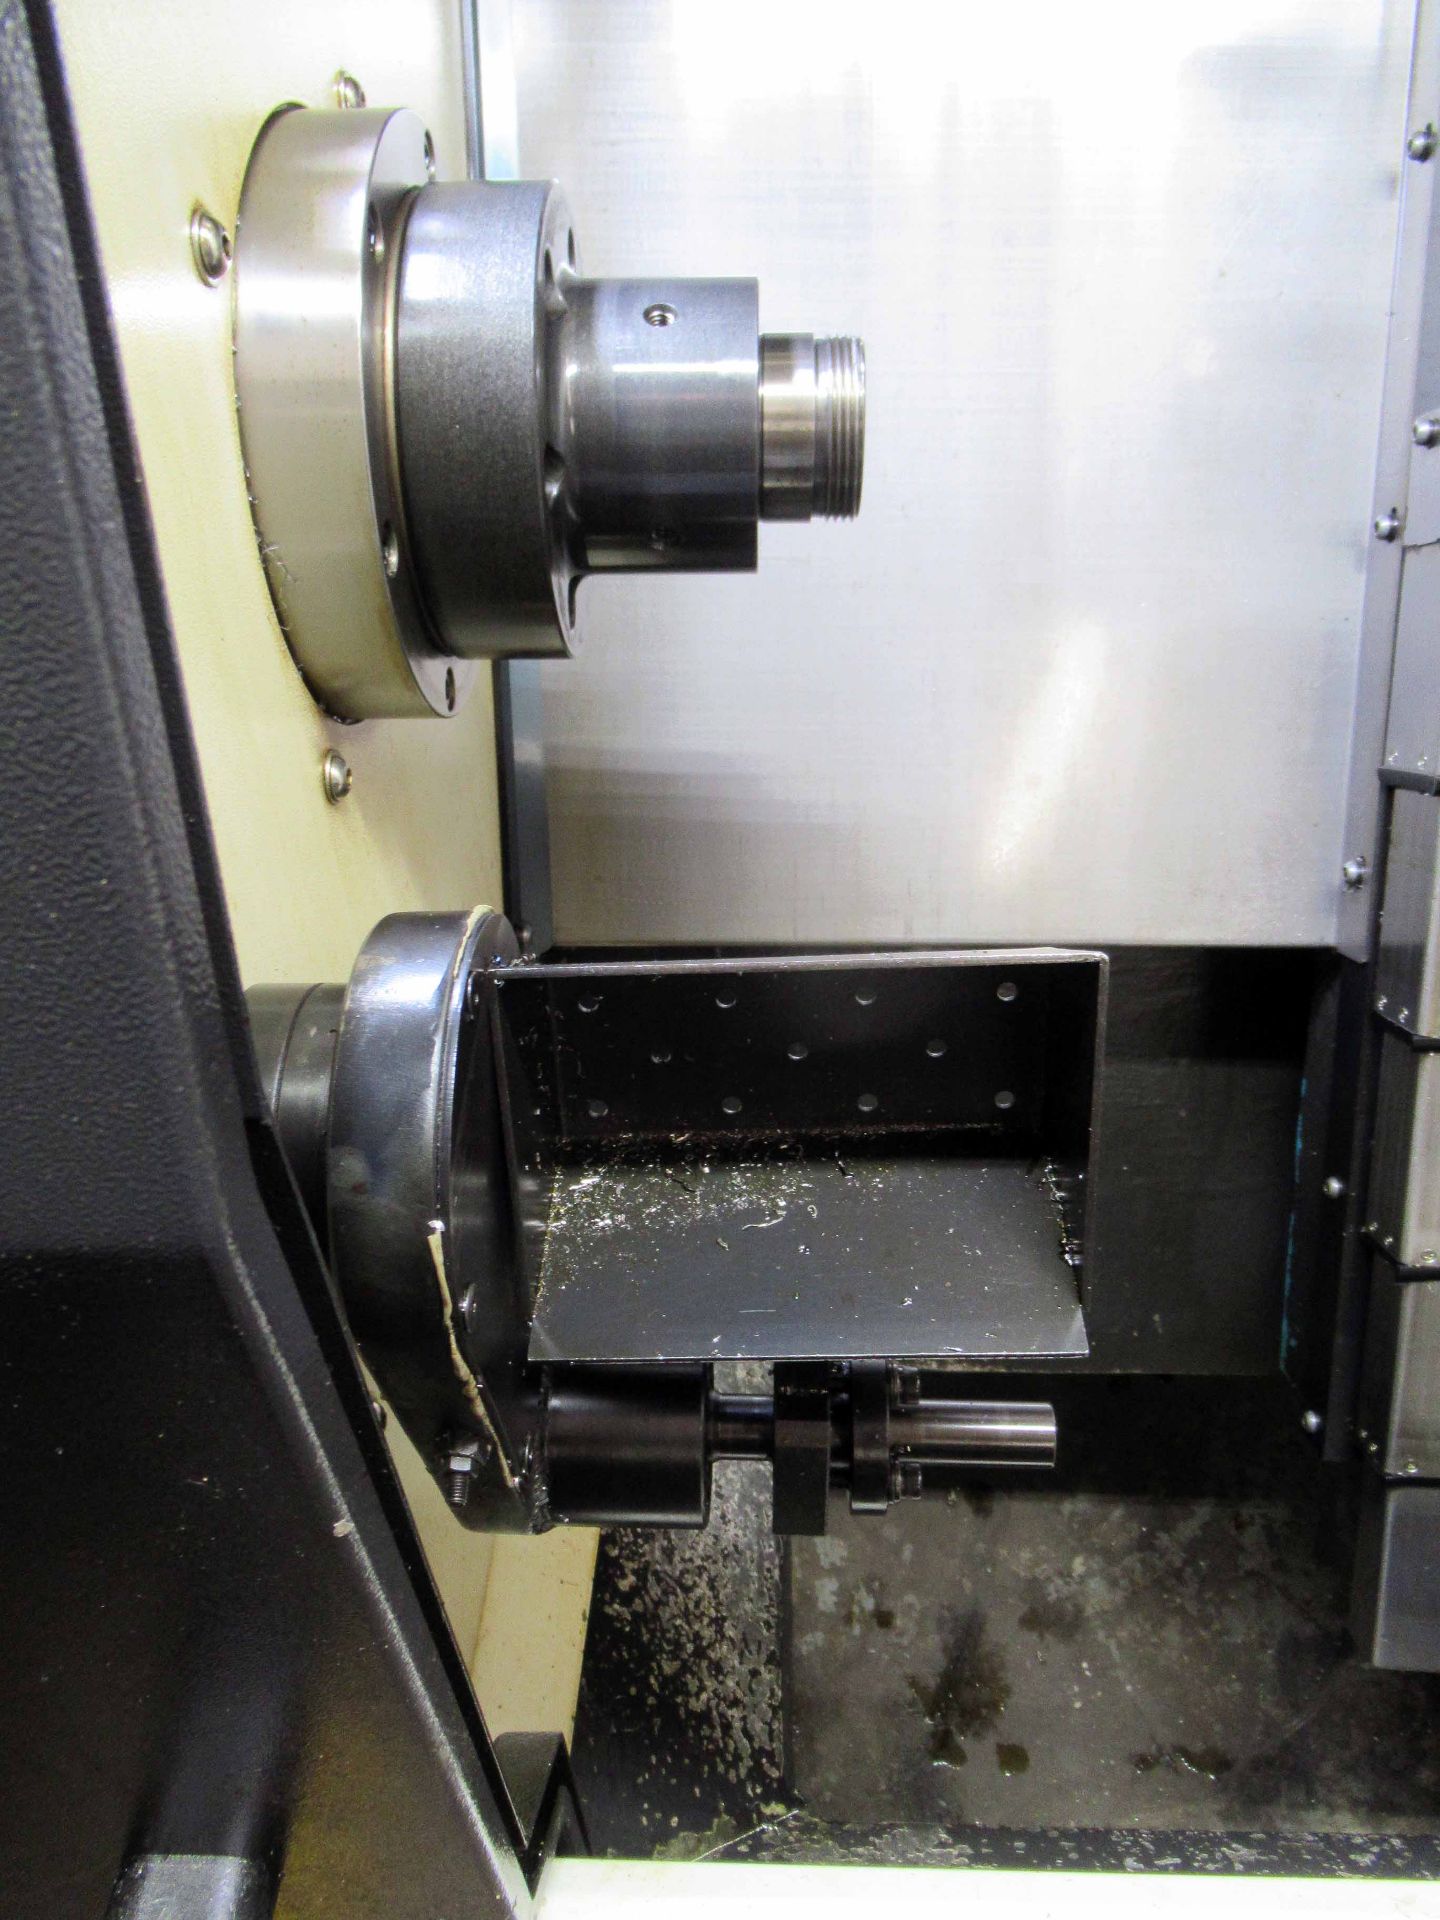 CNC LATHE, HYUNDAI WIA MDL. KIT-400, new 2012, Fanuc i Series control, collet chuck, 6-station - Image 8 of 12